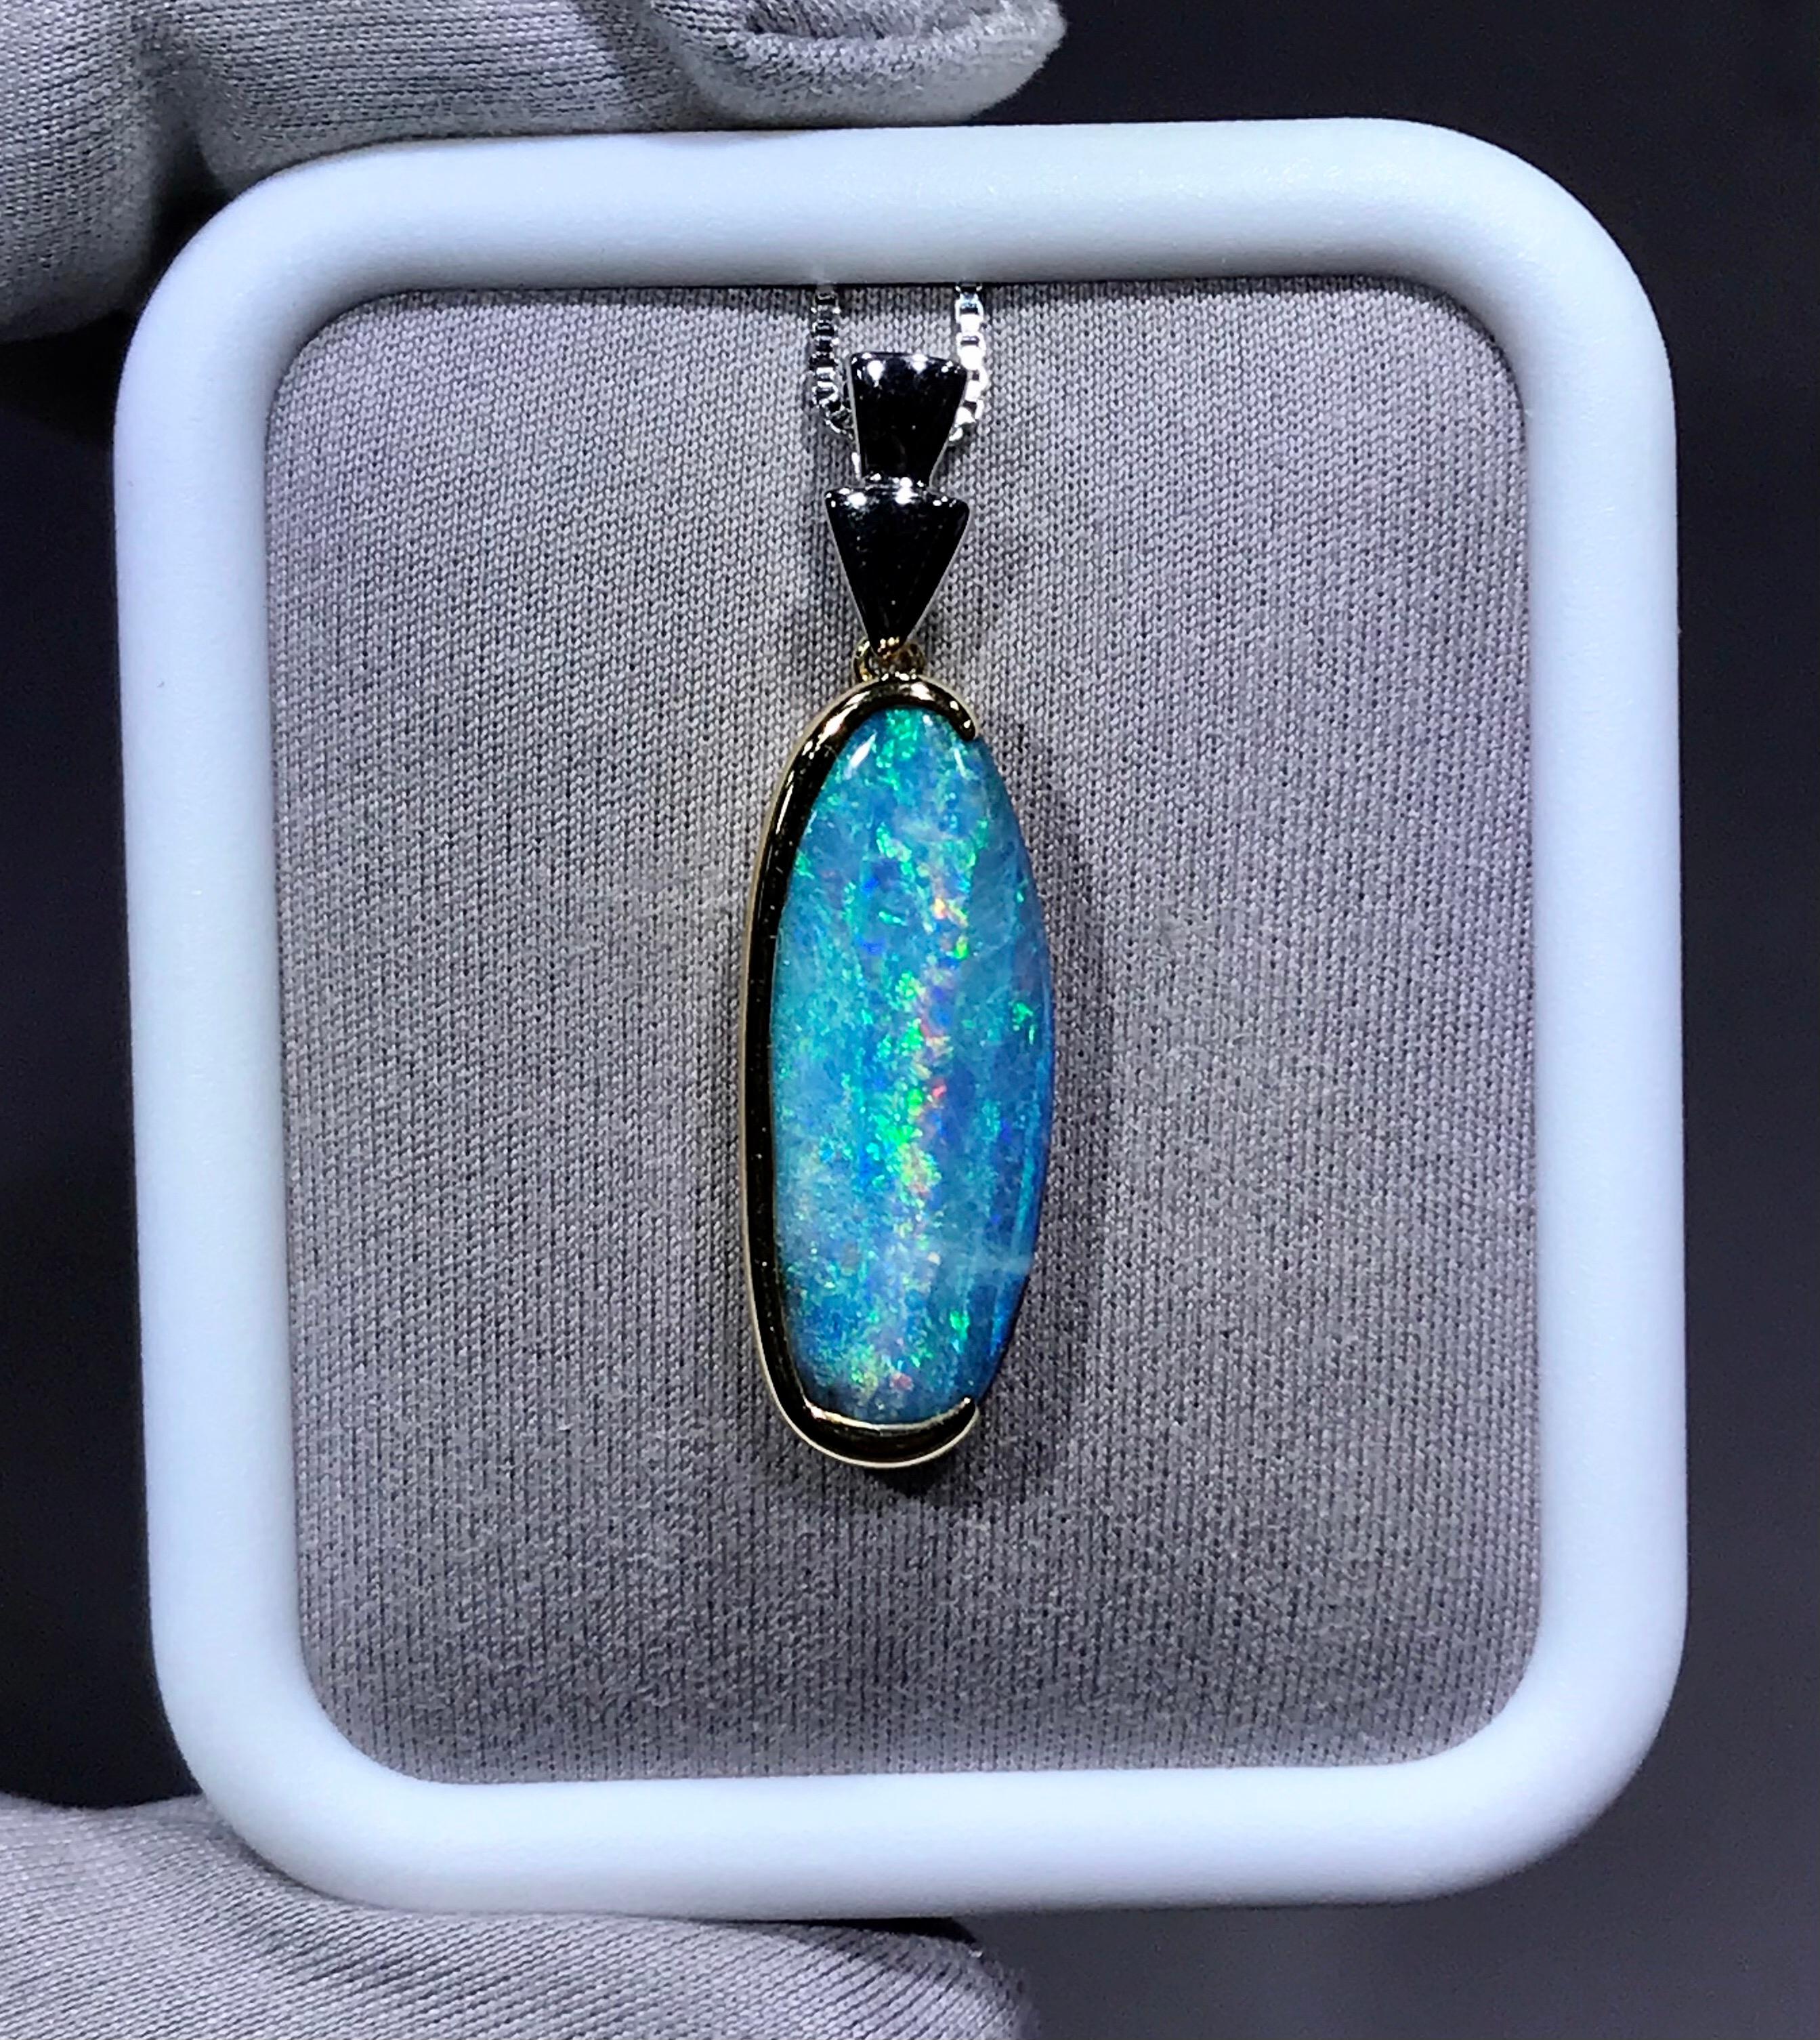 The luminescent opal at the center of  ‘Jundah’s Wonder’ opal pendant recalls memories of beaches, best friends, and endless summer days. An 18K white and yellow gold setting pendant shows off an outstanding 5.93ct opal from Winton, Australia. An